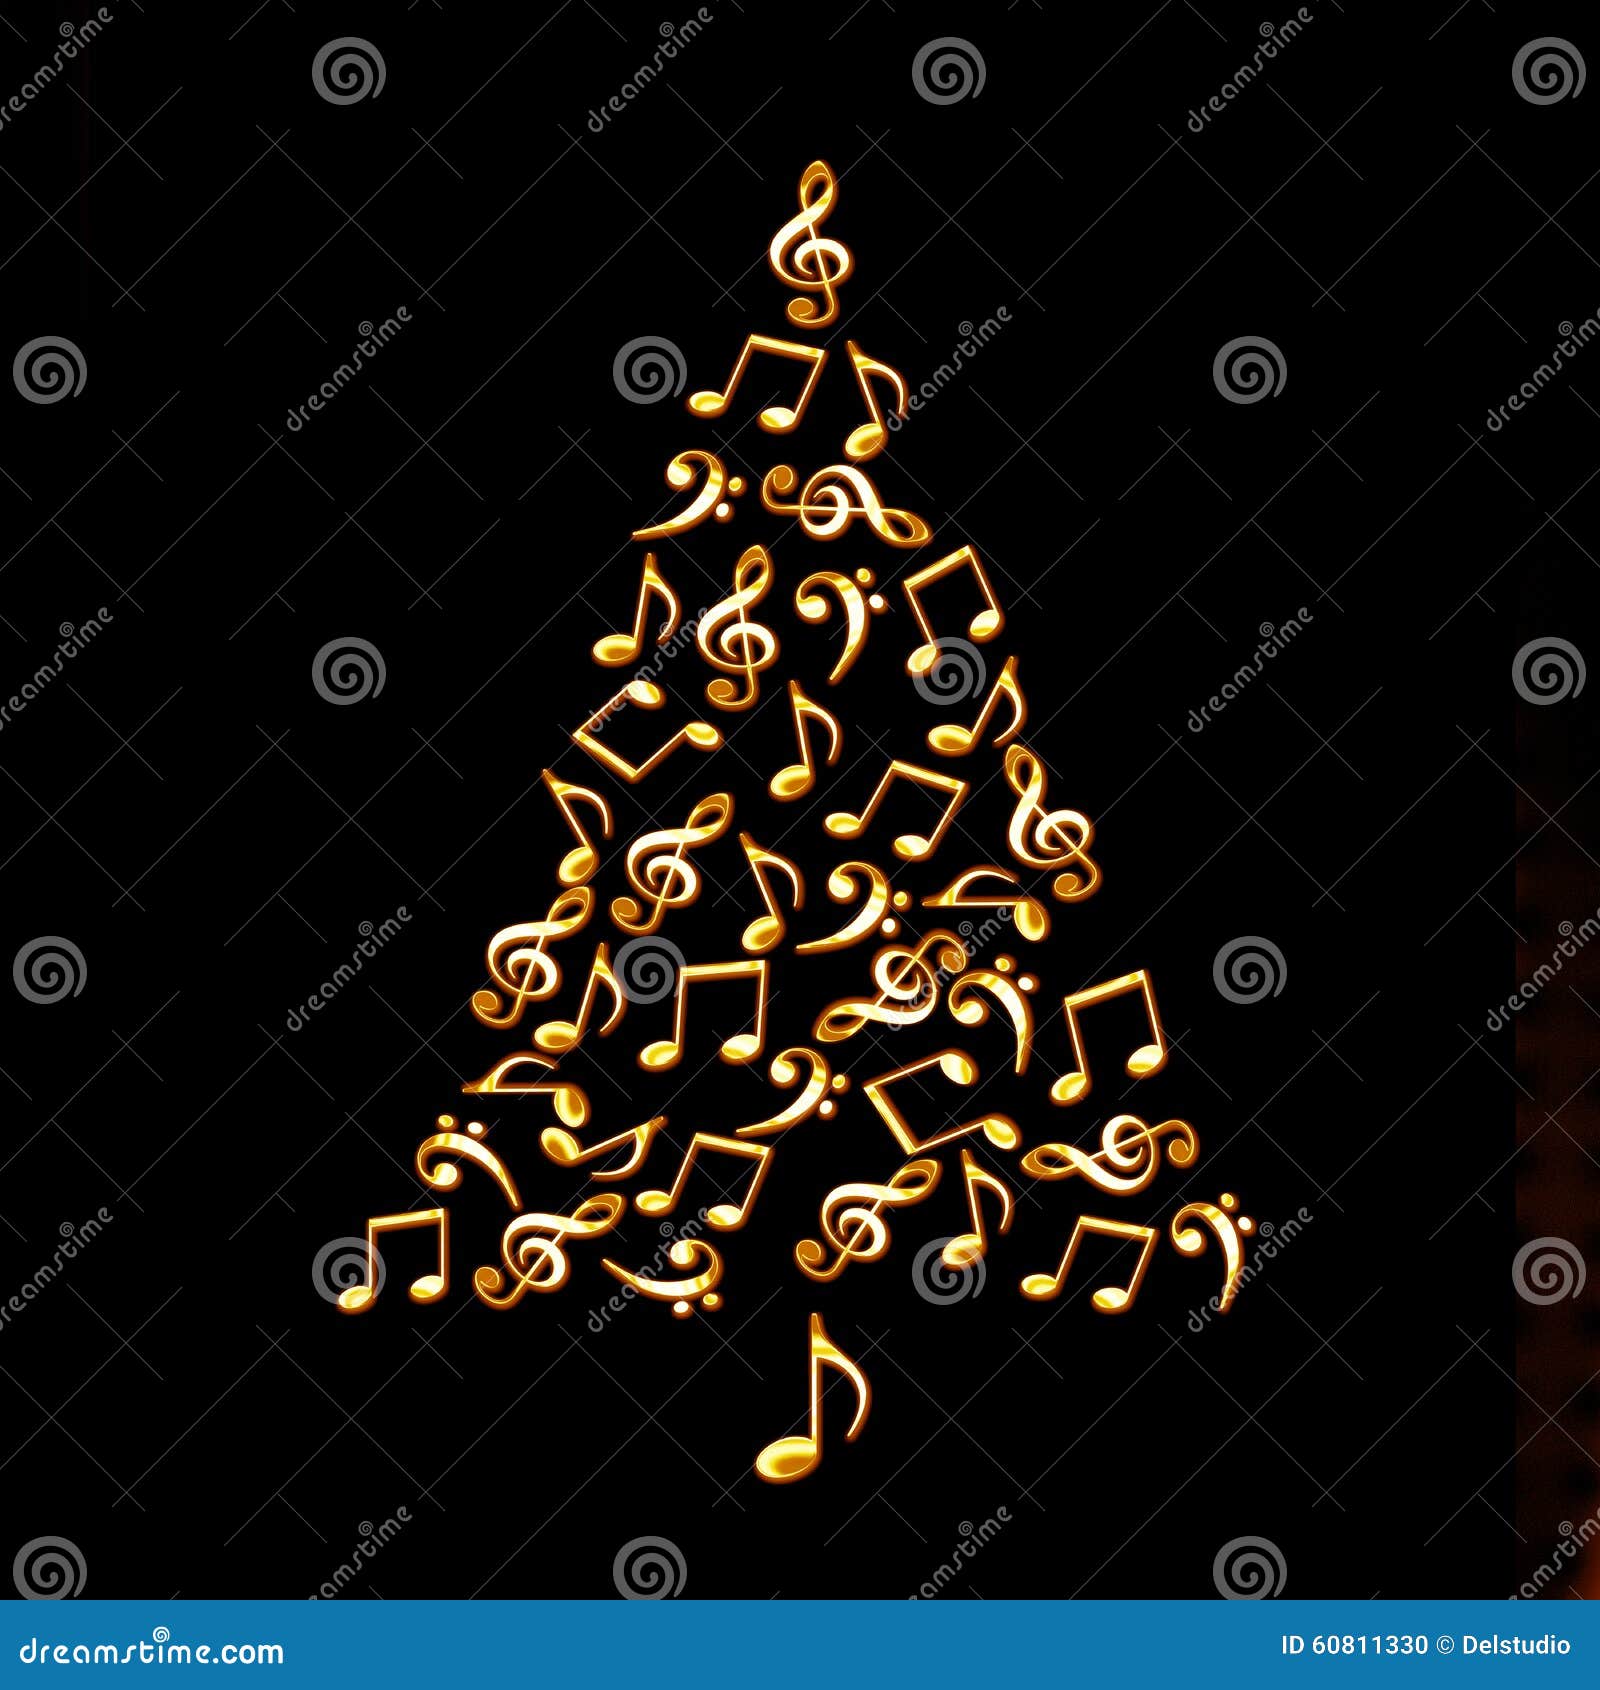 christmas tree made of shiny golden musical notes on black